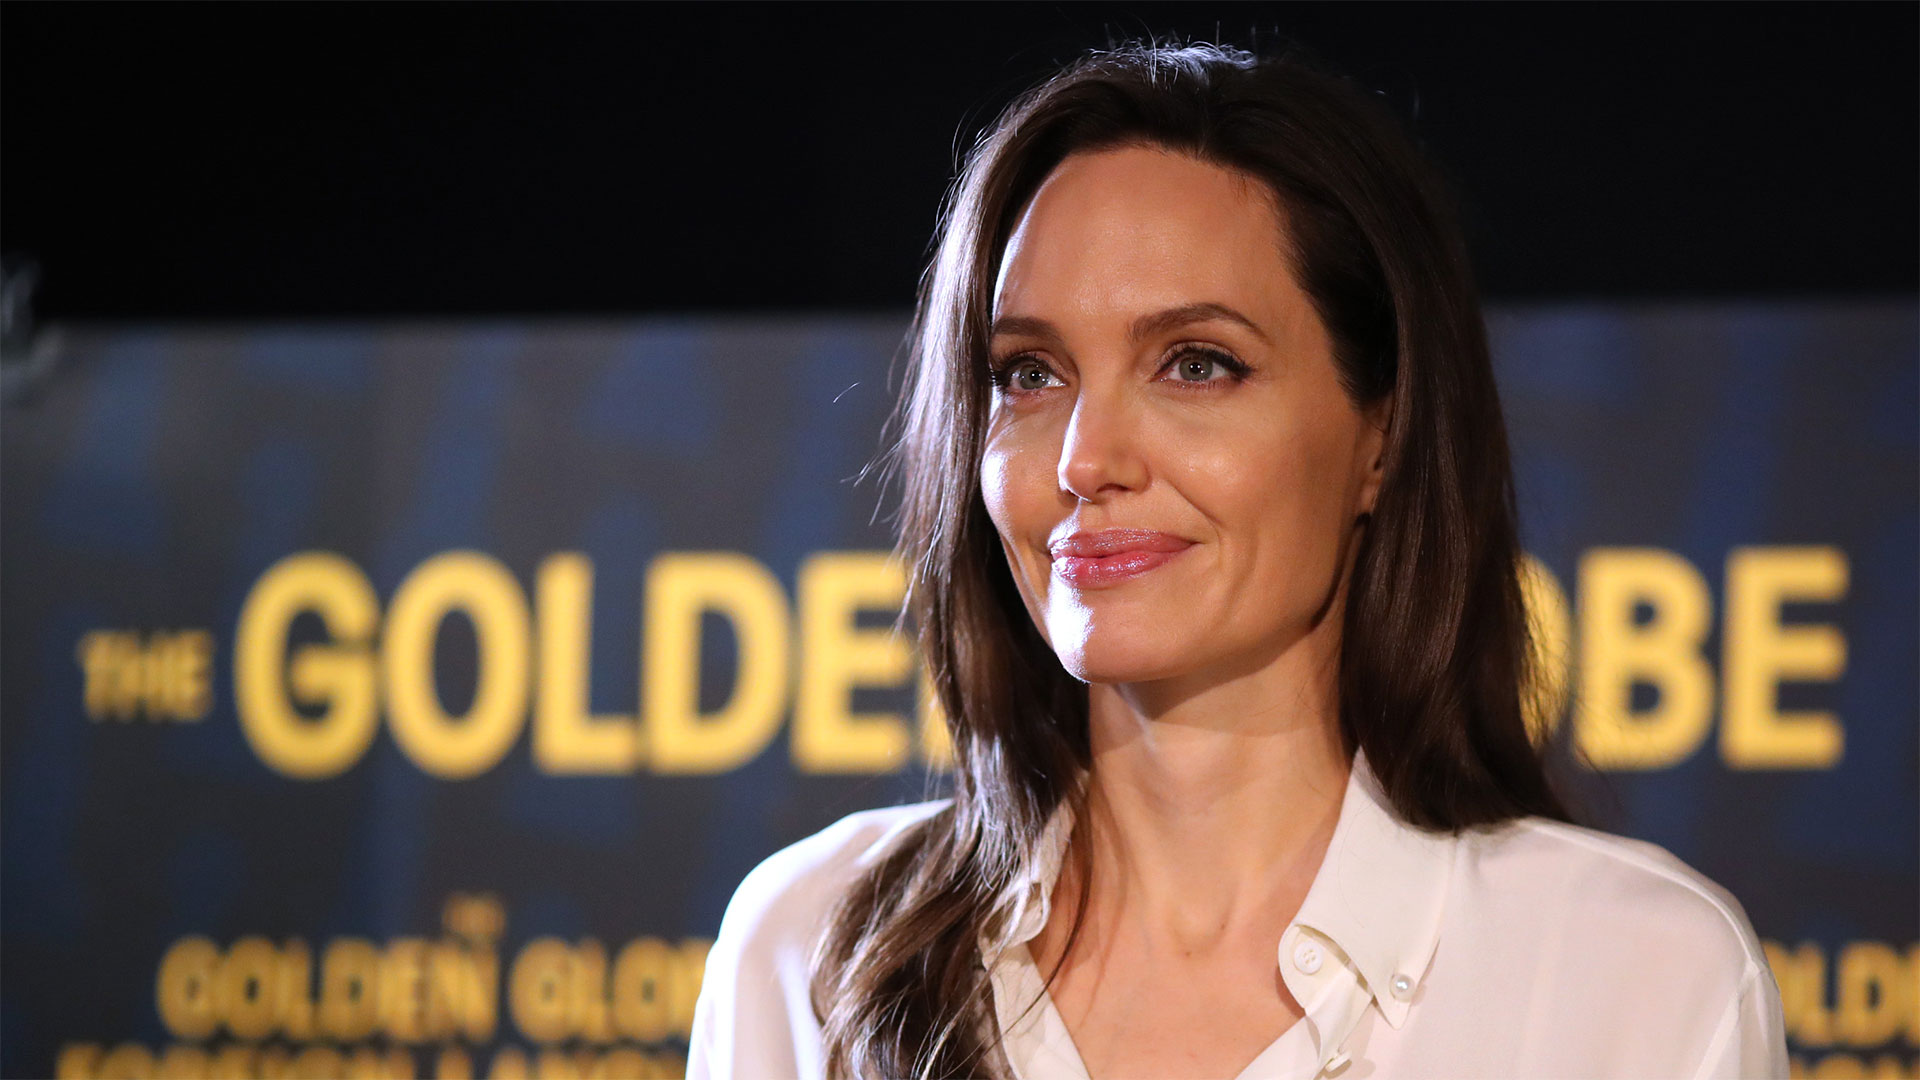 Watch Access Hollywood Interview: Angelina Jolie Questions Why Women
Don’t Know Their Own Value